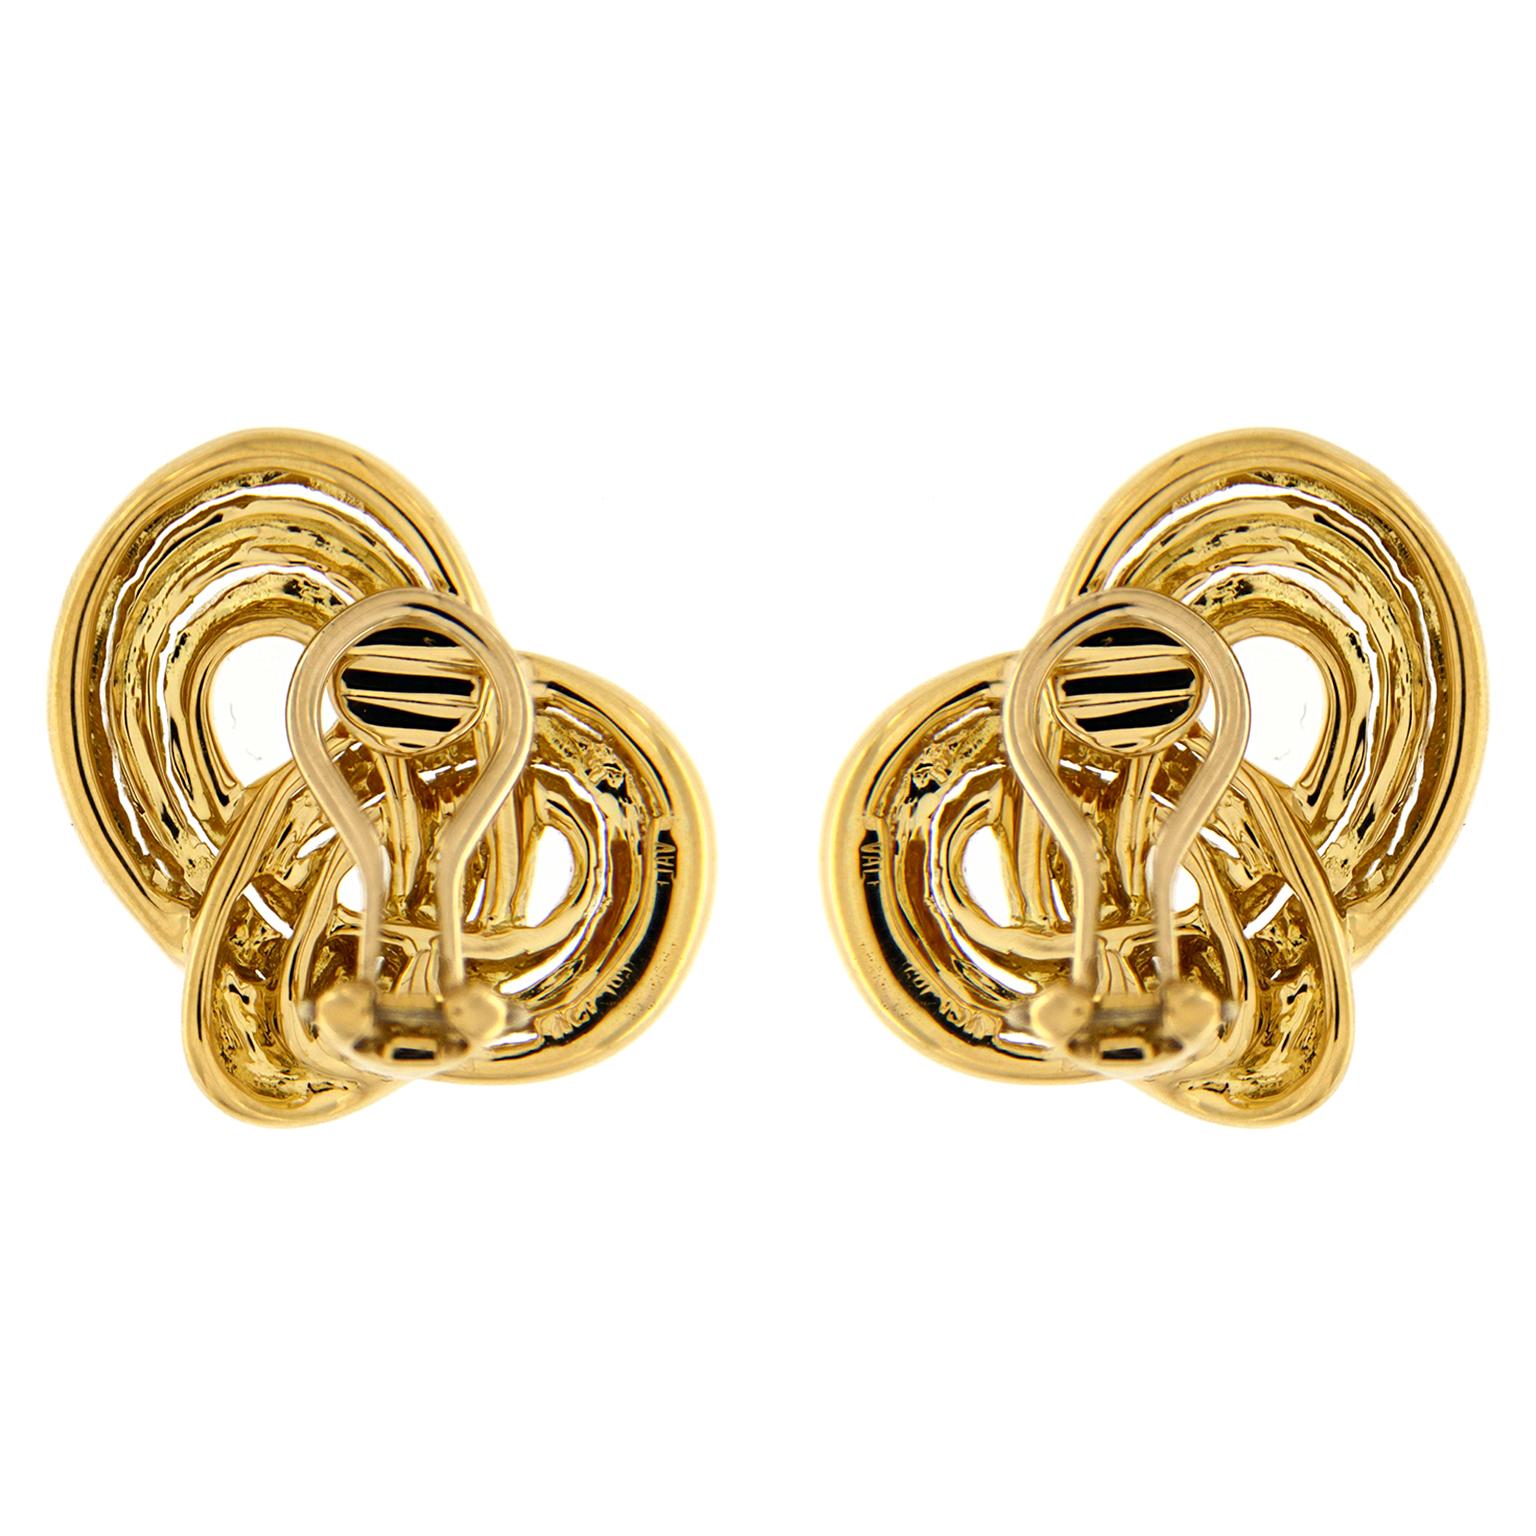 Valentin Magro Small Gold Rope and Wire Overlap Earrings resemble a loose knot. Their material of choice is 18k yellow gold. In the middle runs twisted rope, while the edges are smooth wire. The entire strip tapers towards the ends and overlaps into